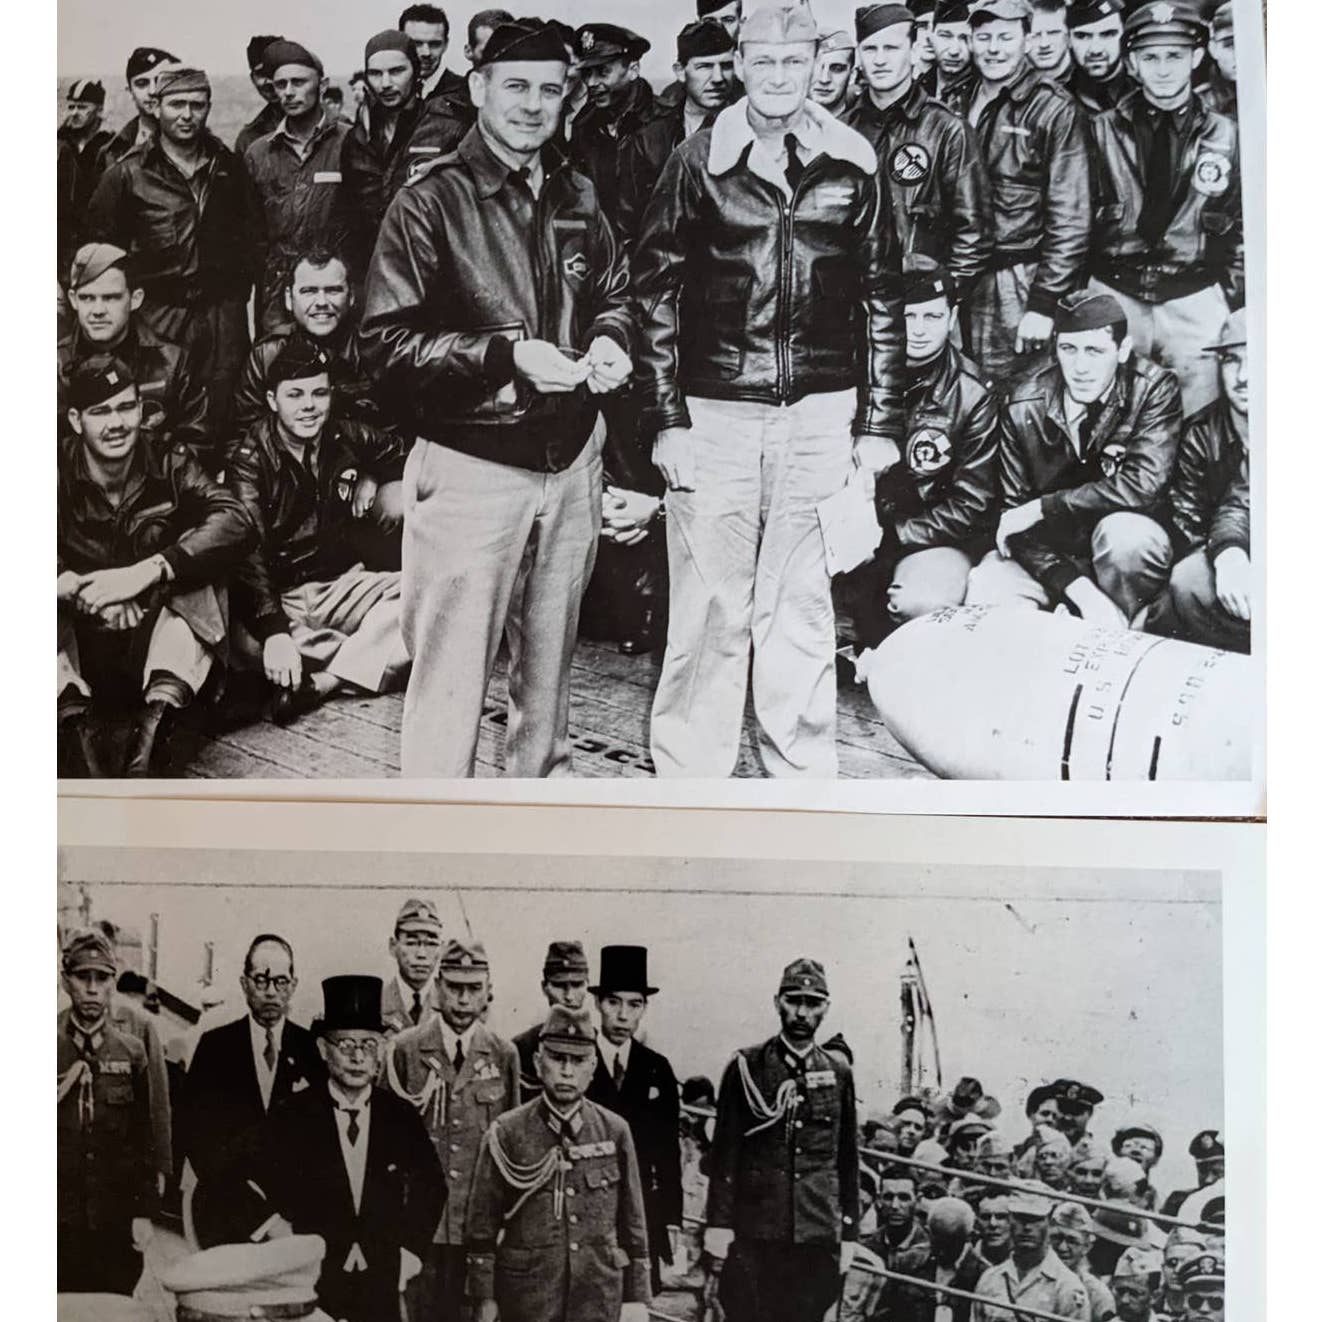 WW2 Images Friends Of The National WWII Memorial Doolittle General MacArthur